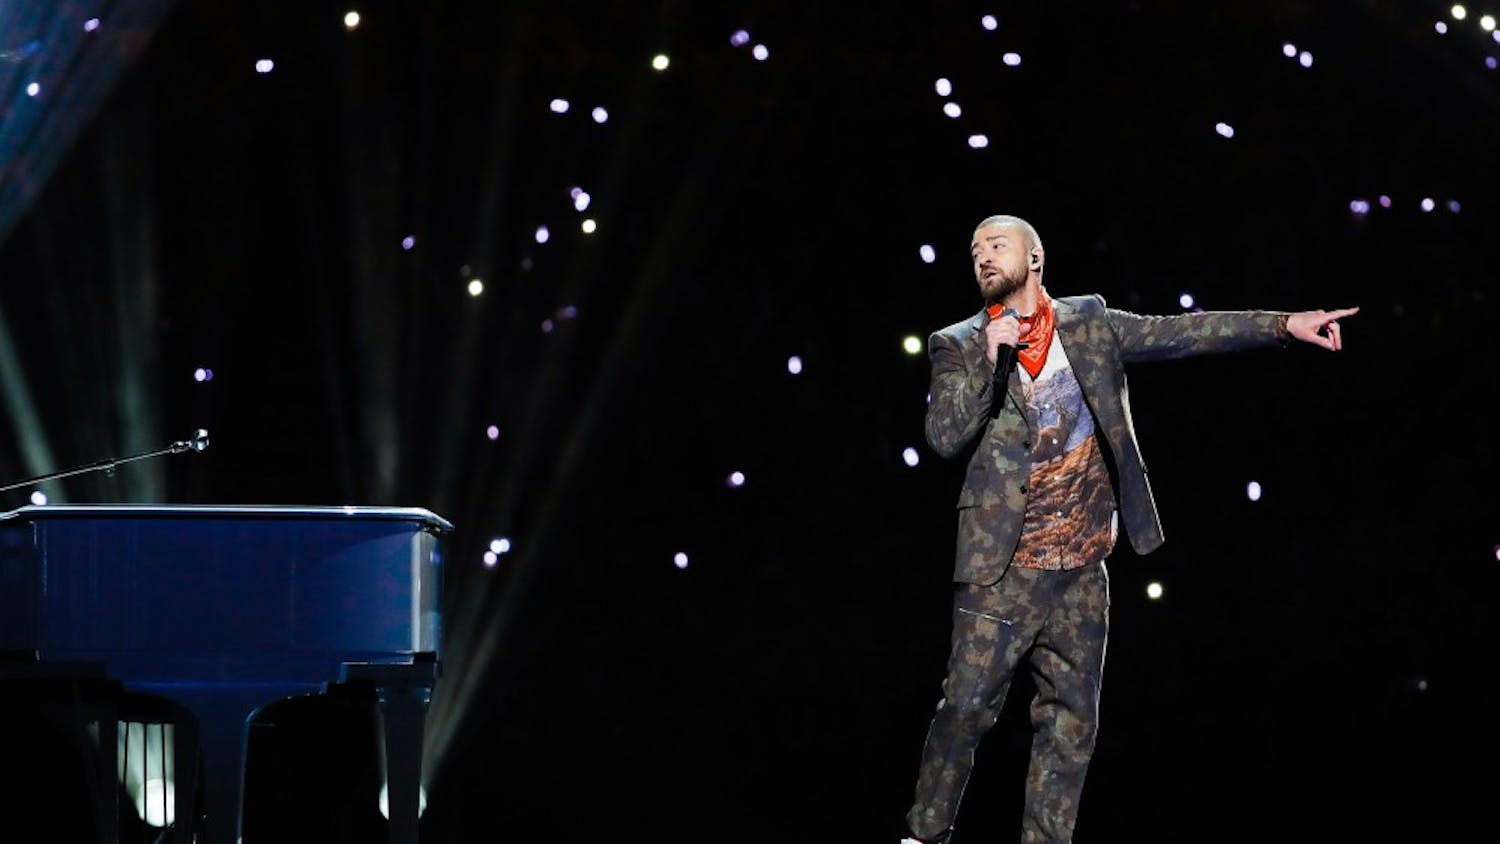 Justin Timberlake performs during the Pepsi Super Bowl LII Halftime Show on Sunday at Super Bowl LII between the New England Patriots and the Philadelphia Eagles at U.S. Bank Stadium in Minneapolis, Minnesota.&nbsp;